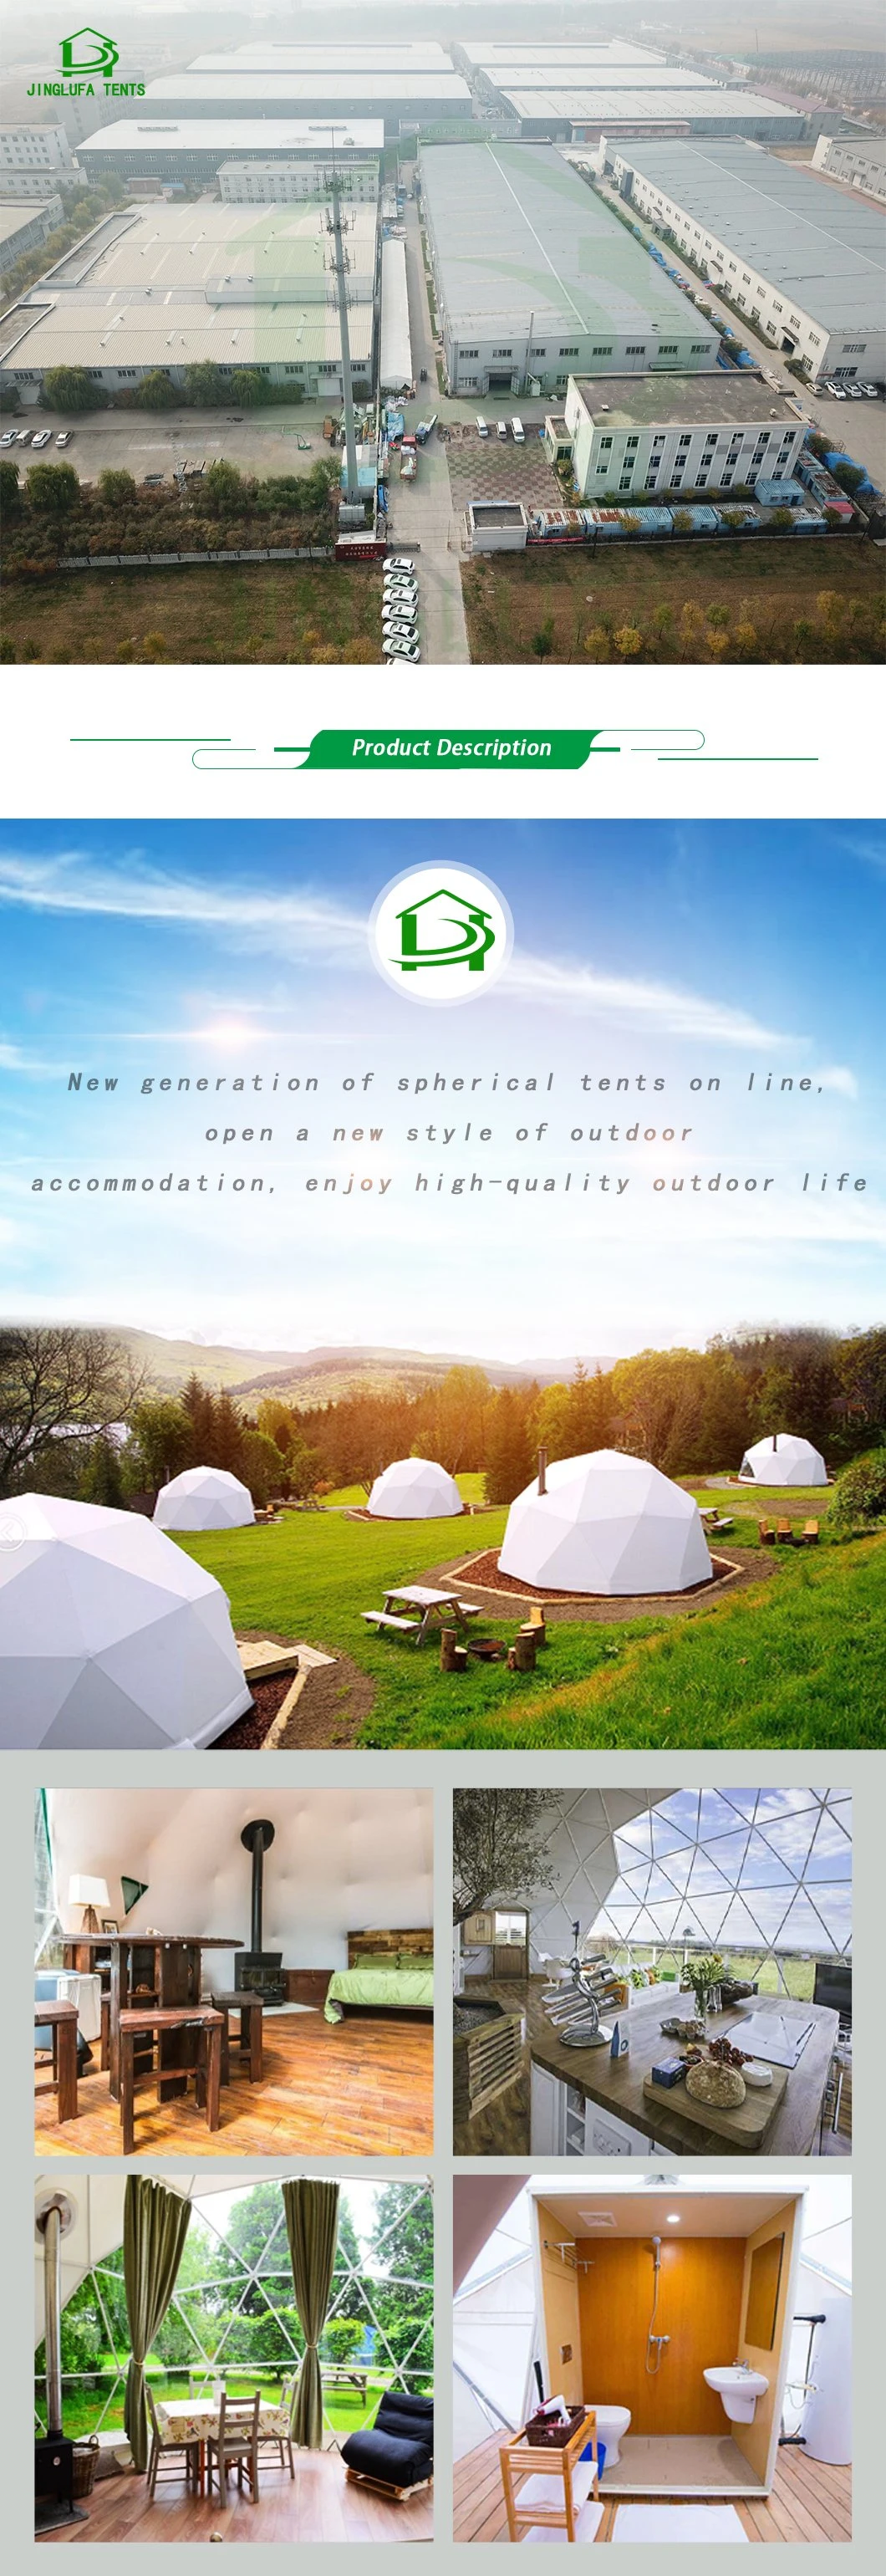 Polystyrene Eco Hotel Resort Desert Dome Tent 8m Tourism for People Accomodation Geodesic Dome Tent Glamping